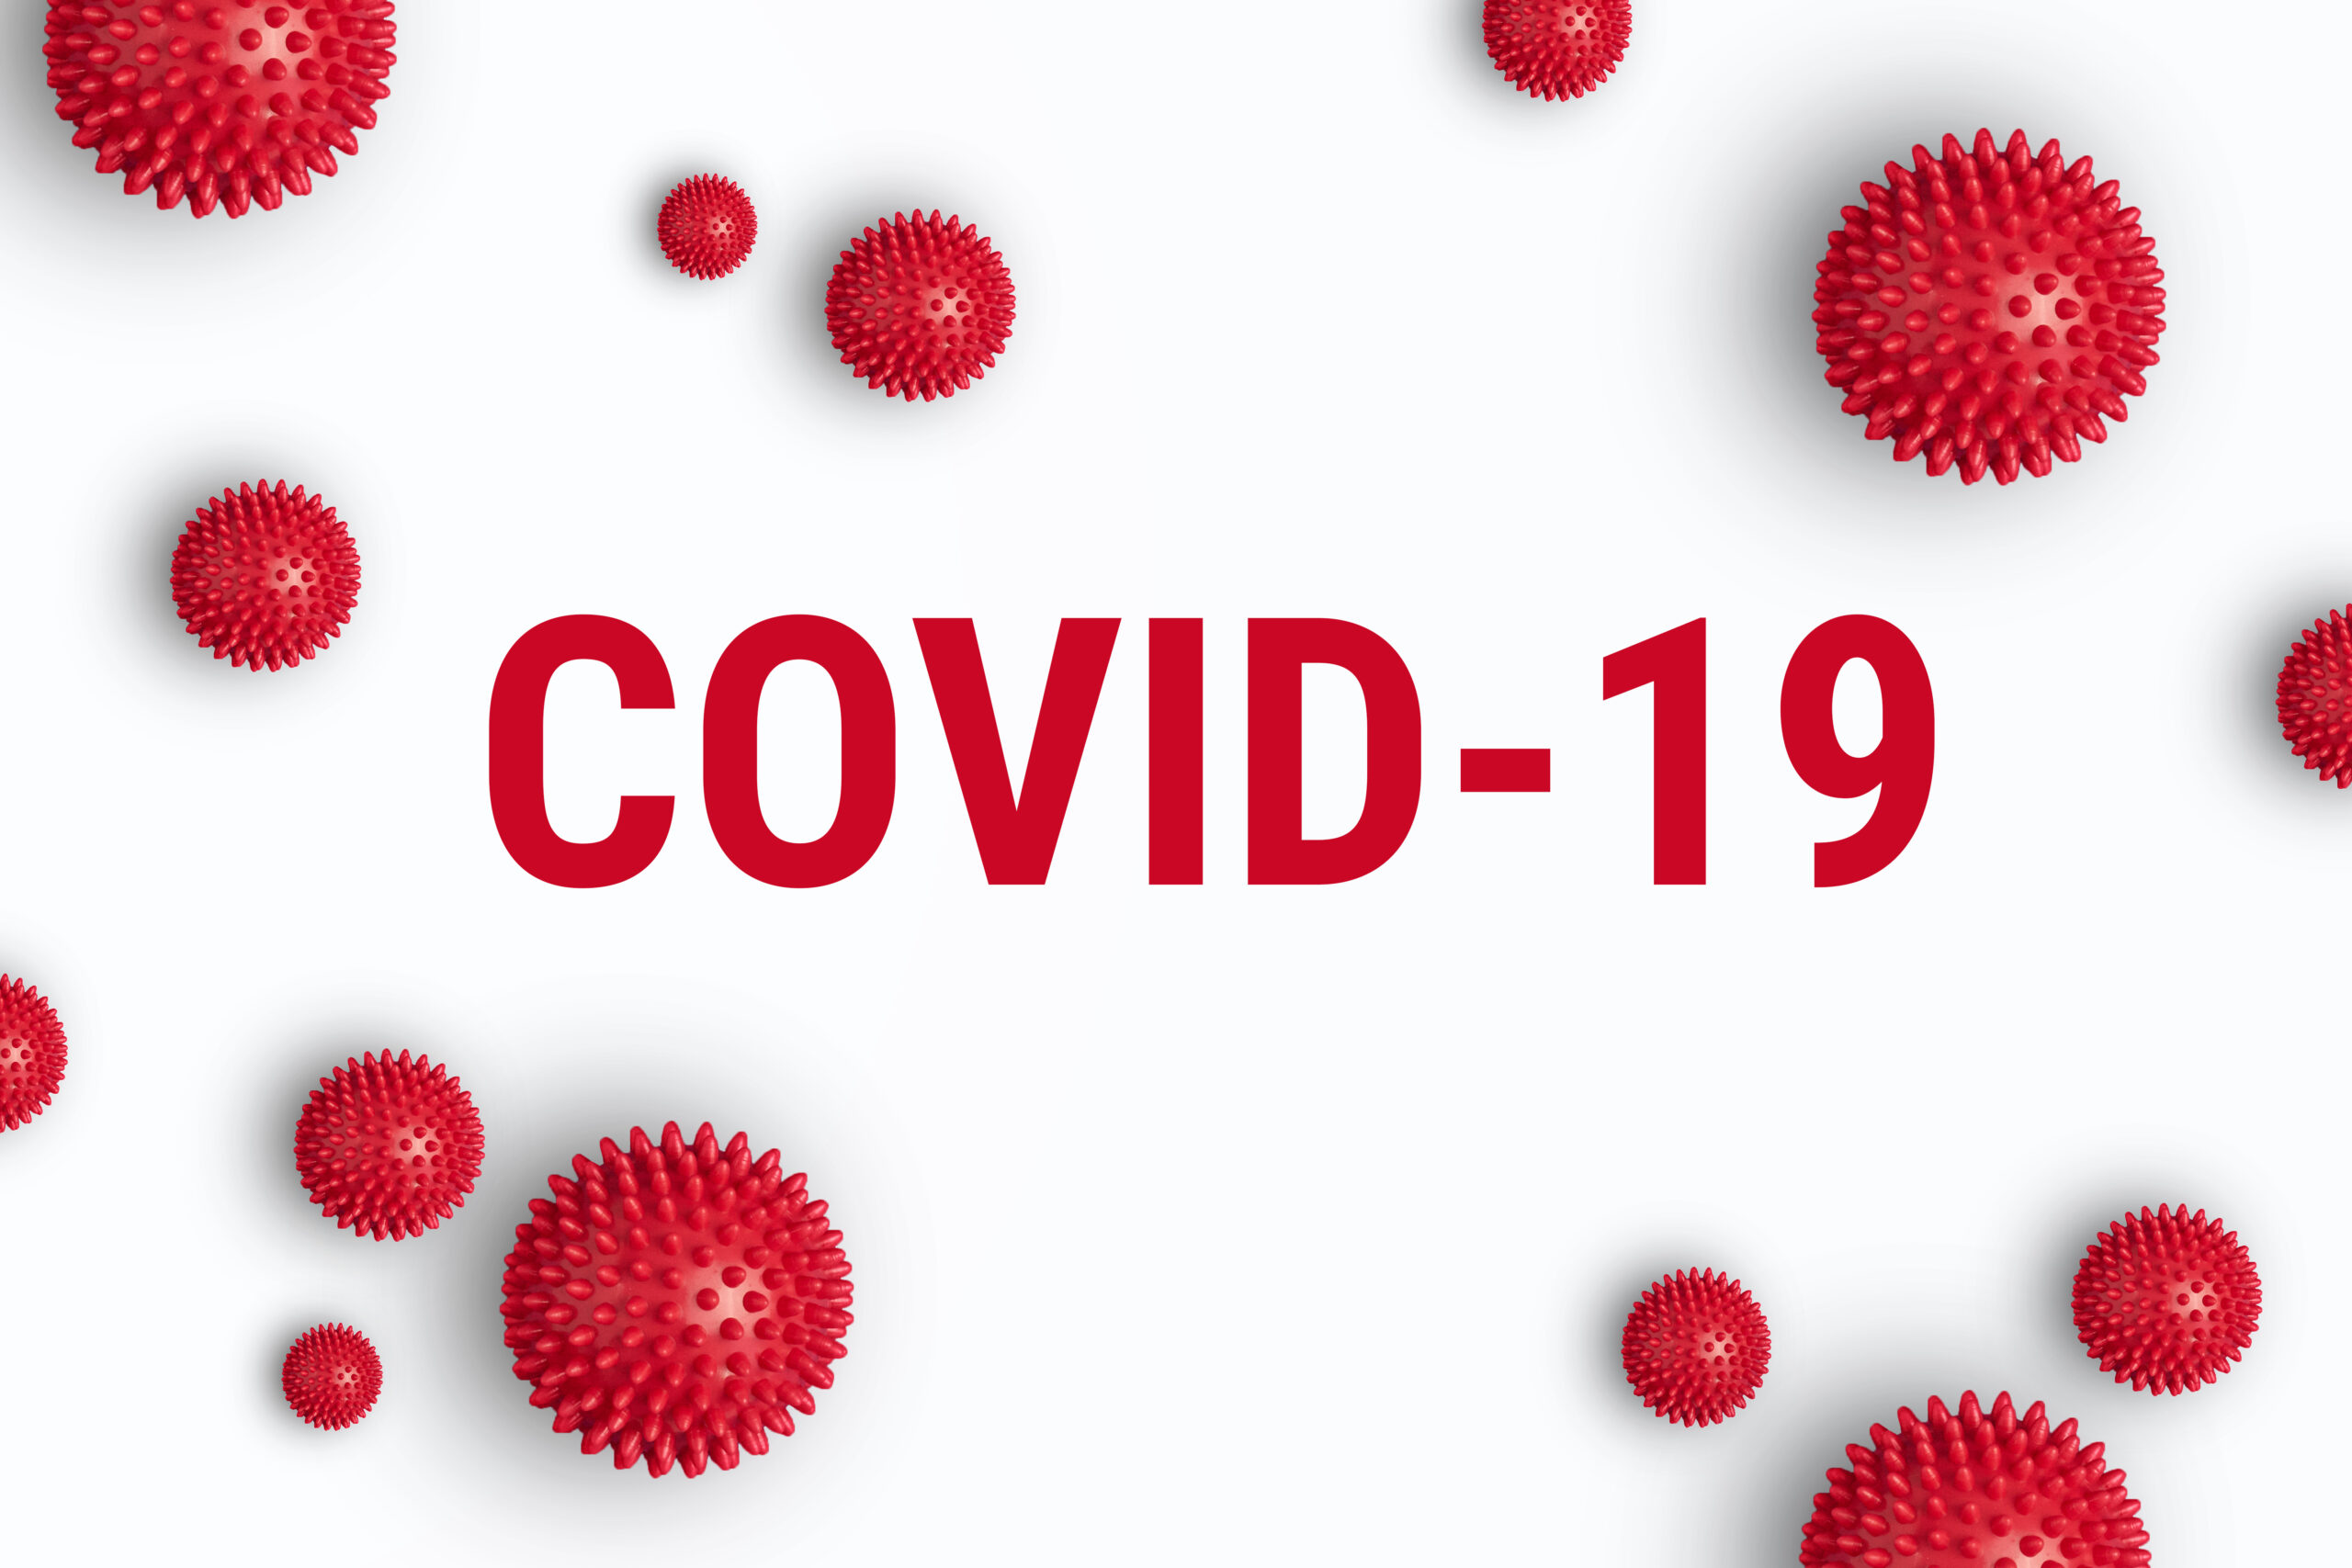 covid-19 text and logo